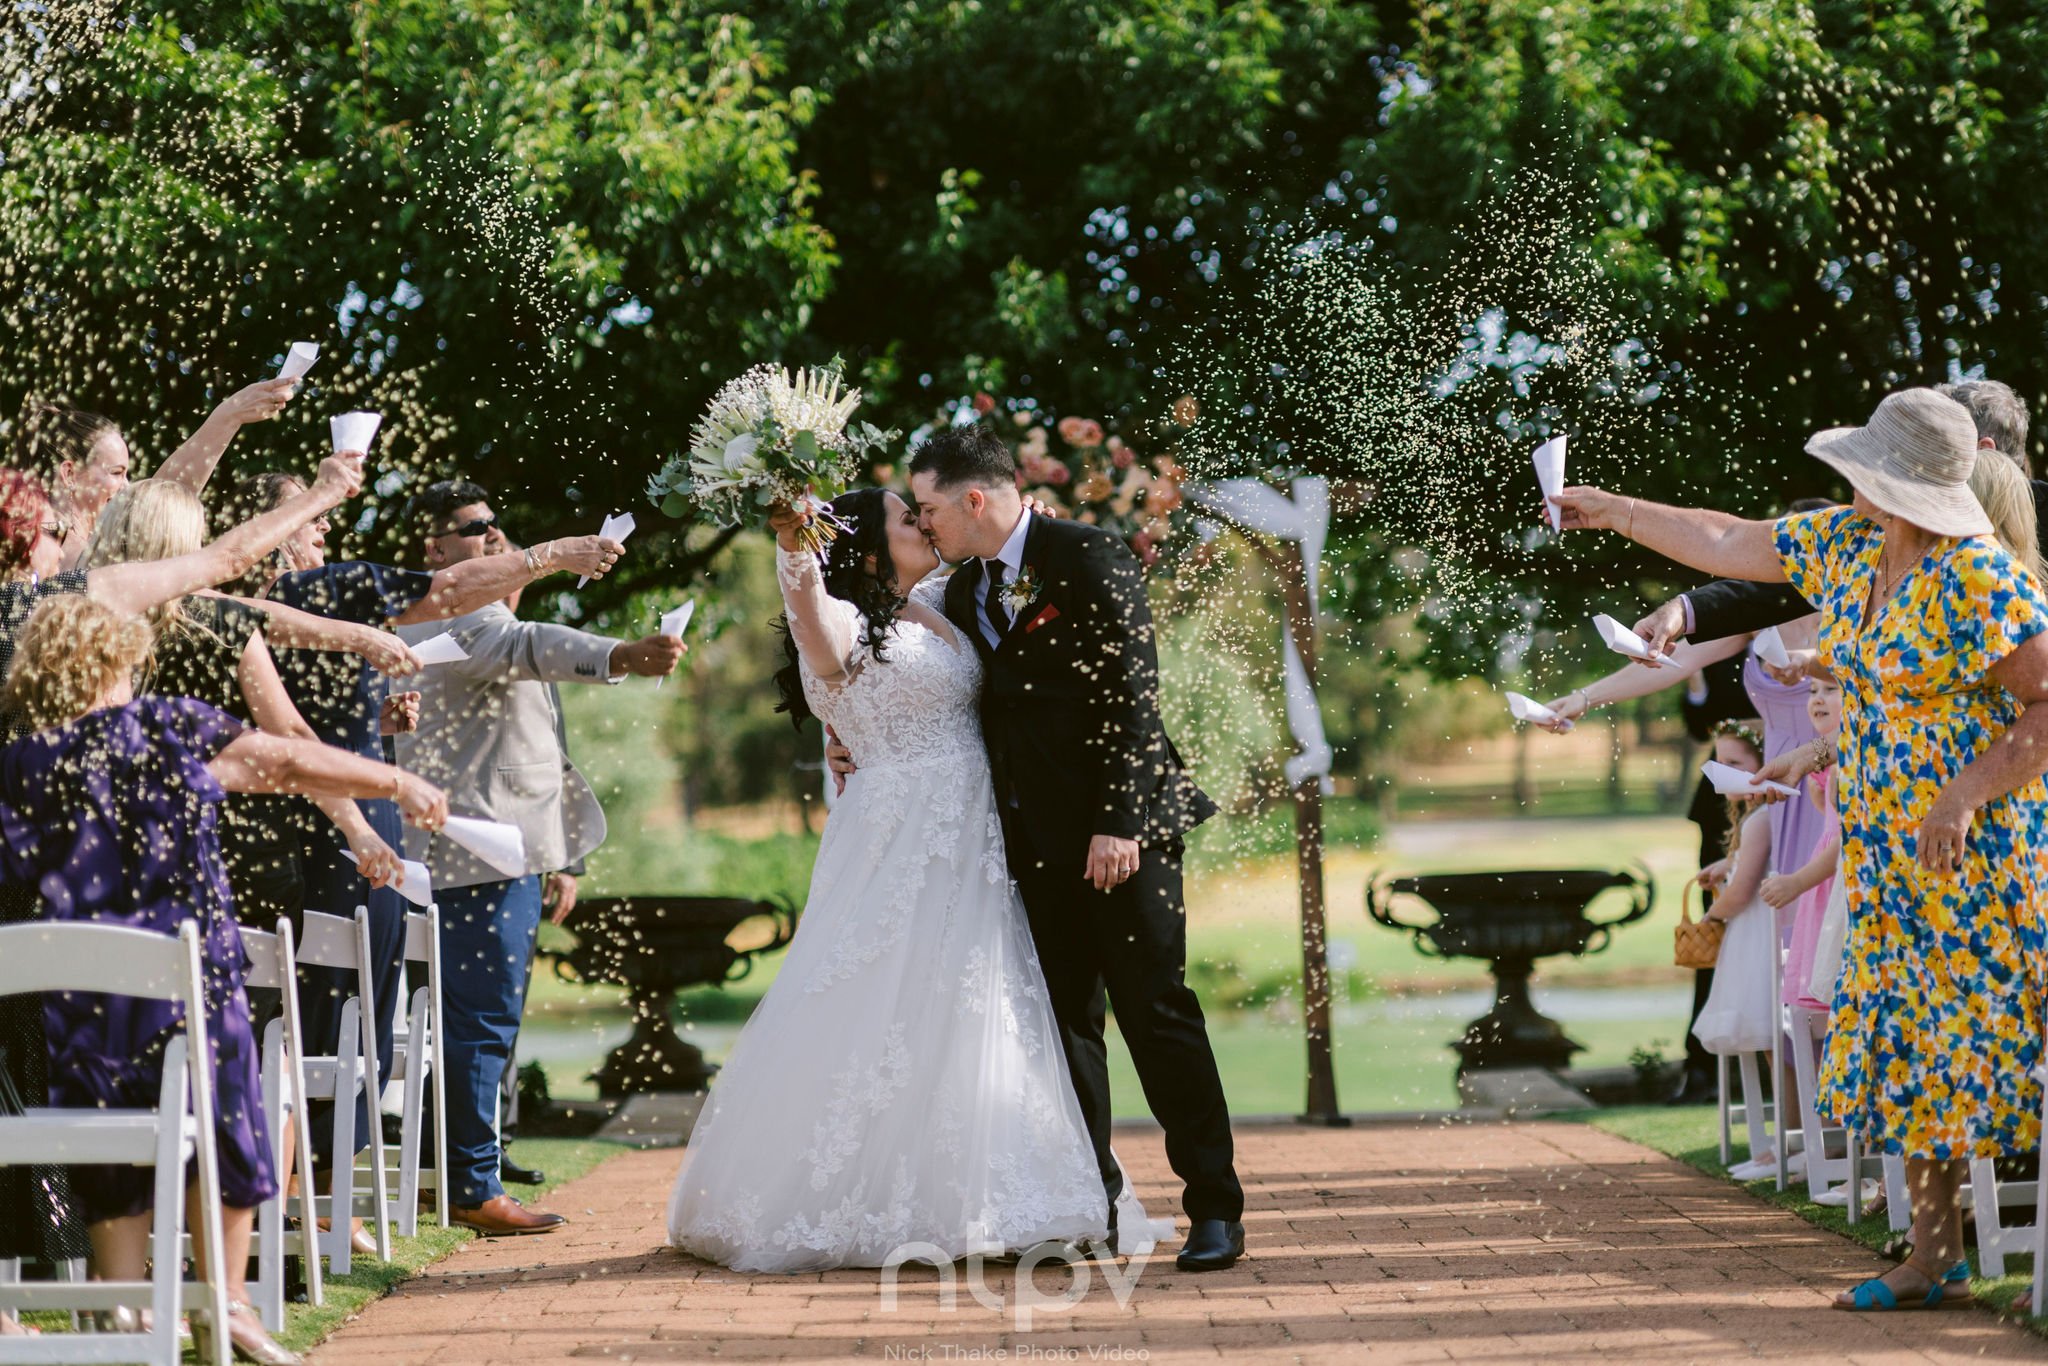 REVIEW: &quot;Candice exceeded all our expectations as a Celebrant. Our script was tailored to us perfectly and she was VERY easy to work with. Her smile and laughter is contagious whilst staying professional at all times. She put me at ease seeing h